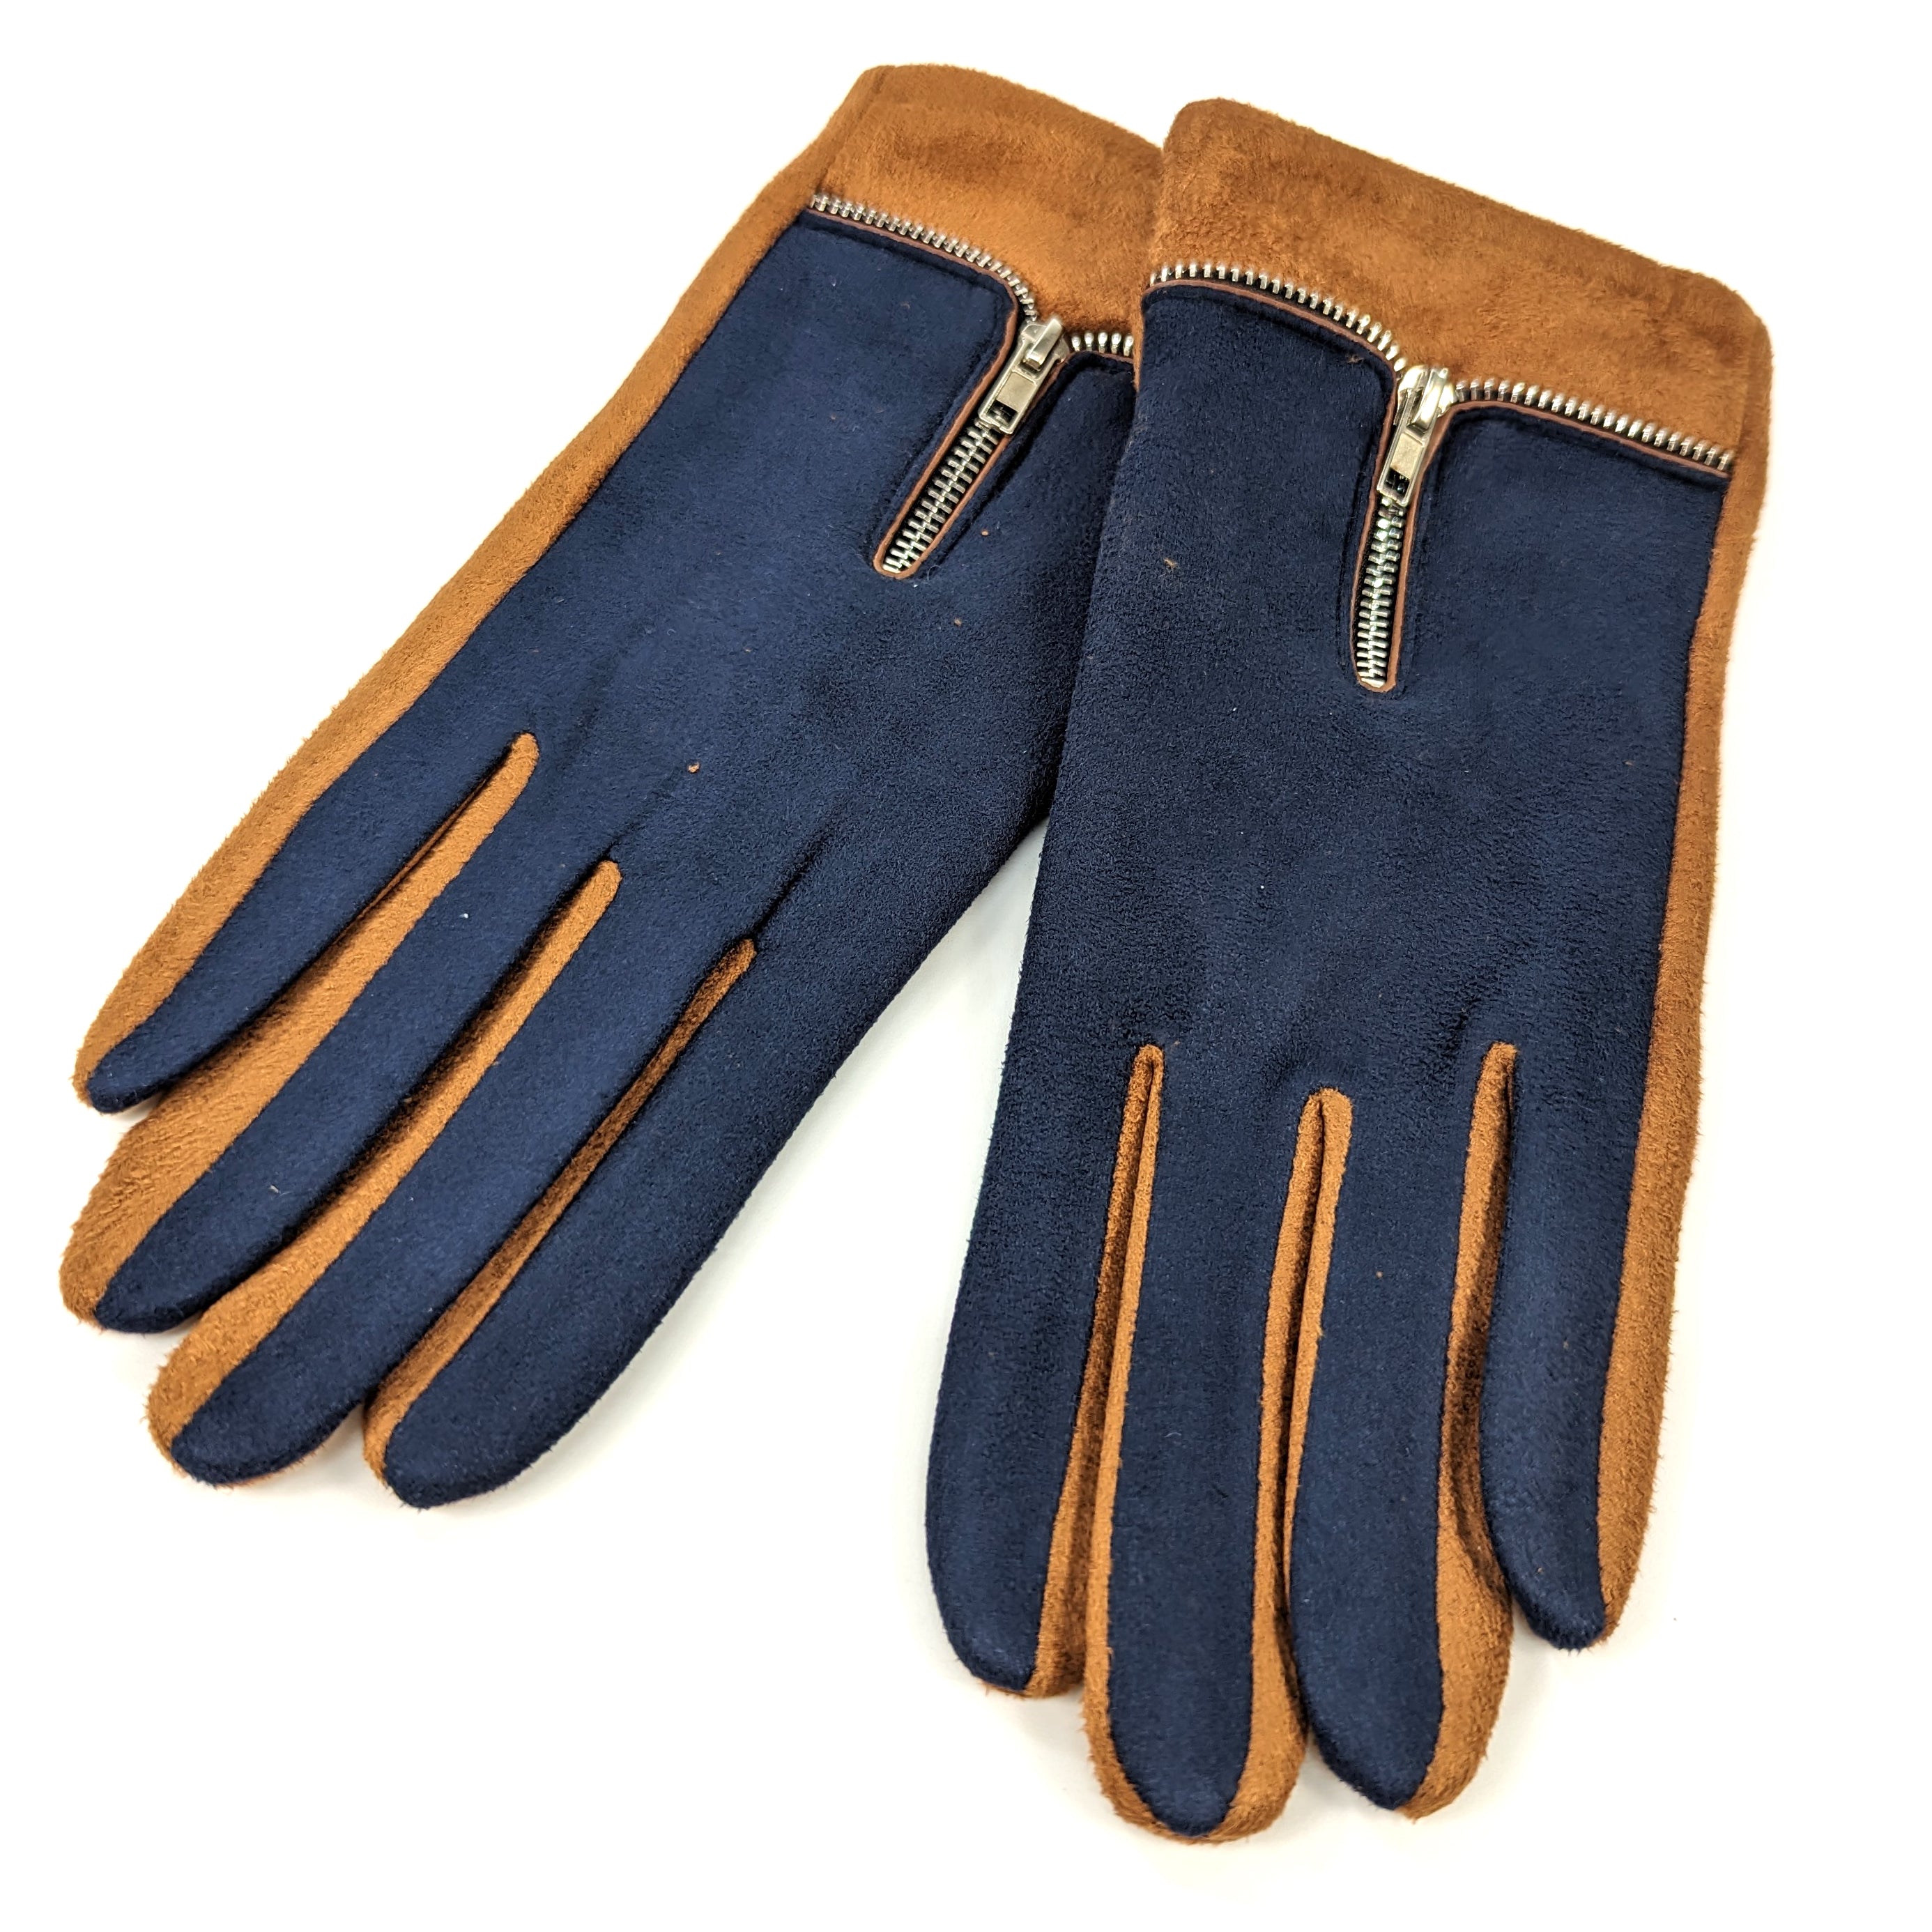 Gloves with a Zip Details - Navy / Camel